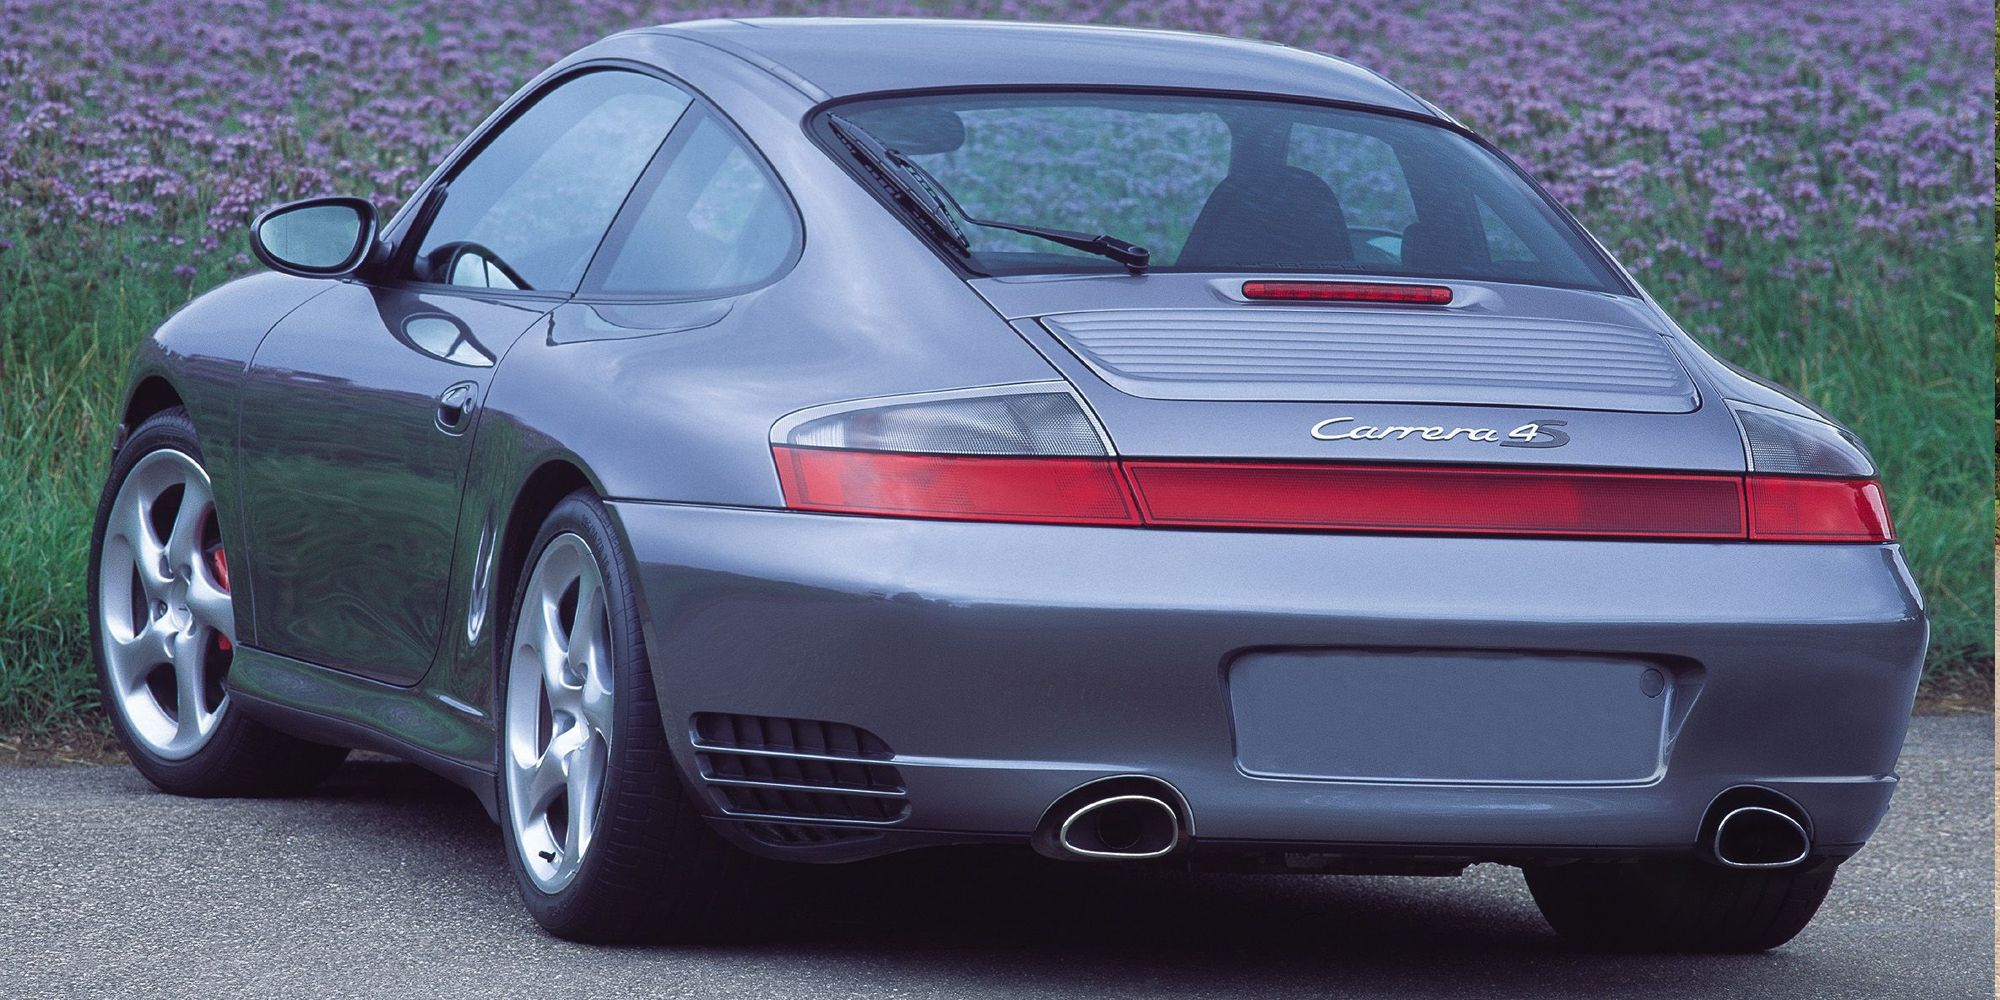 The rear of the 996